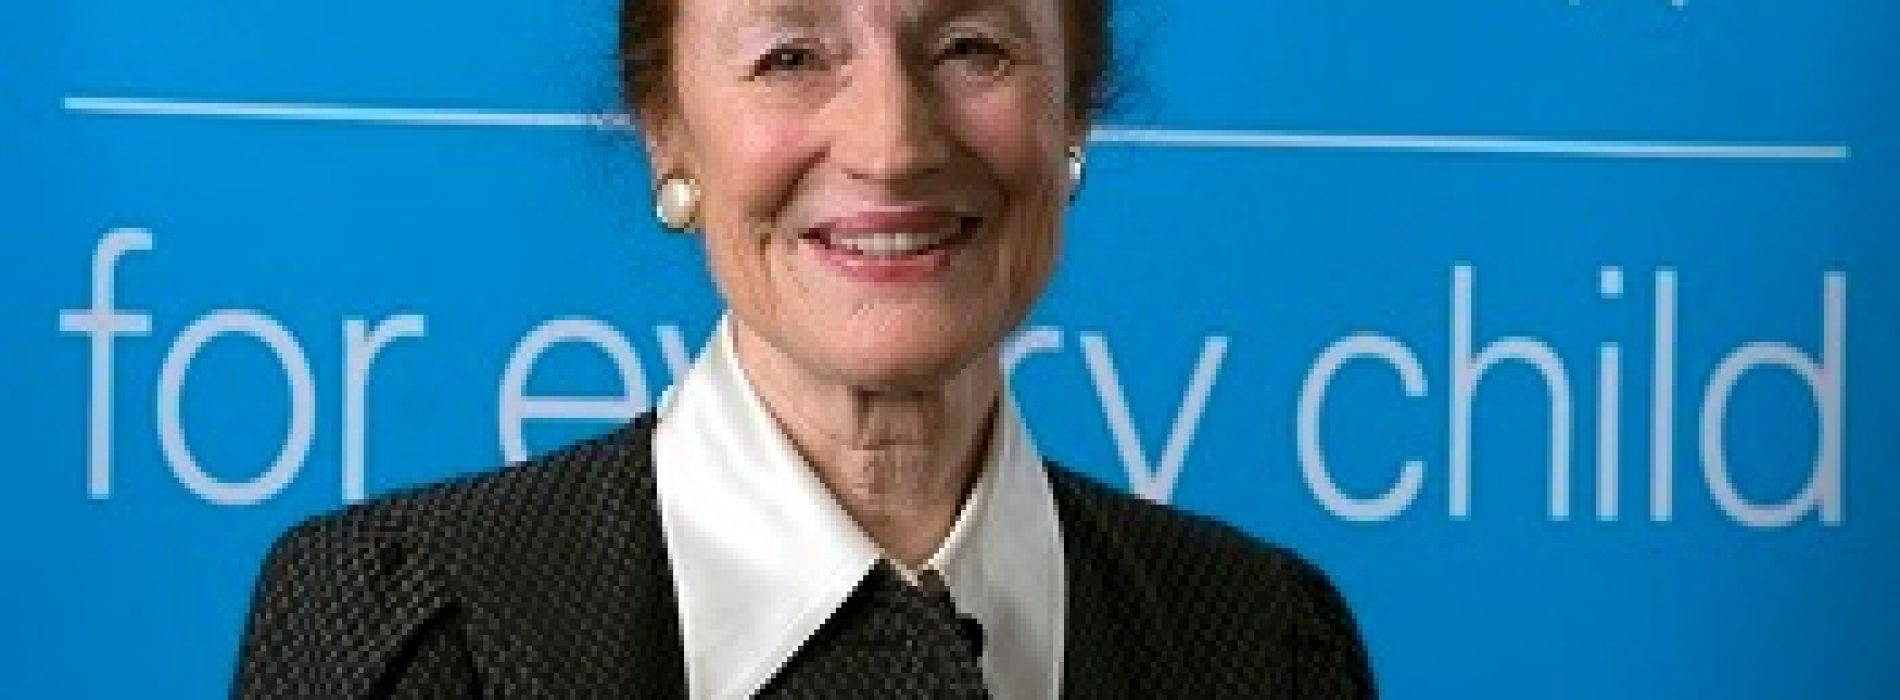 Henrietta Fore becomes new UNICEF Executive Director